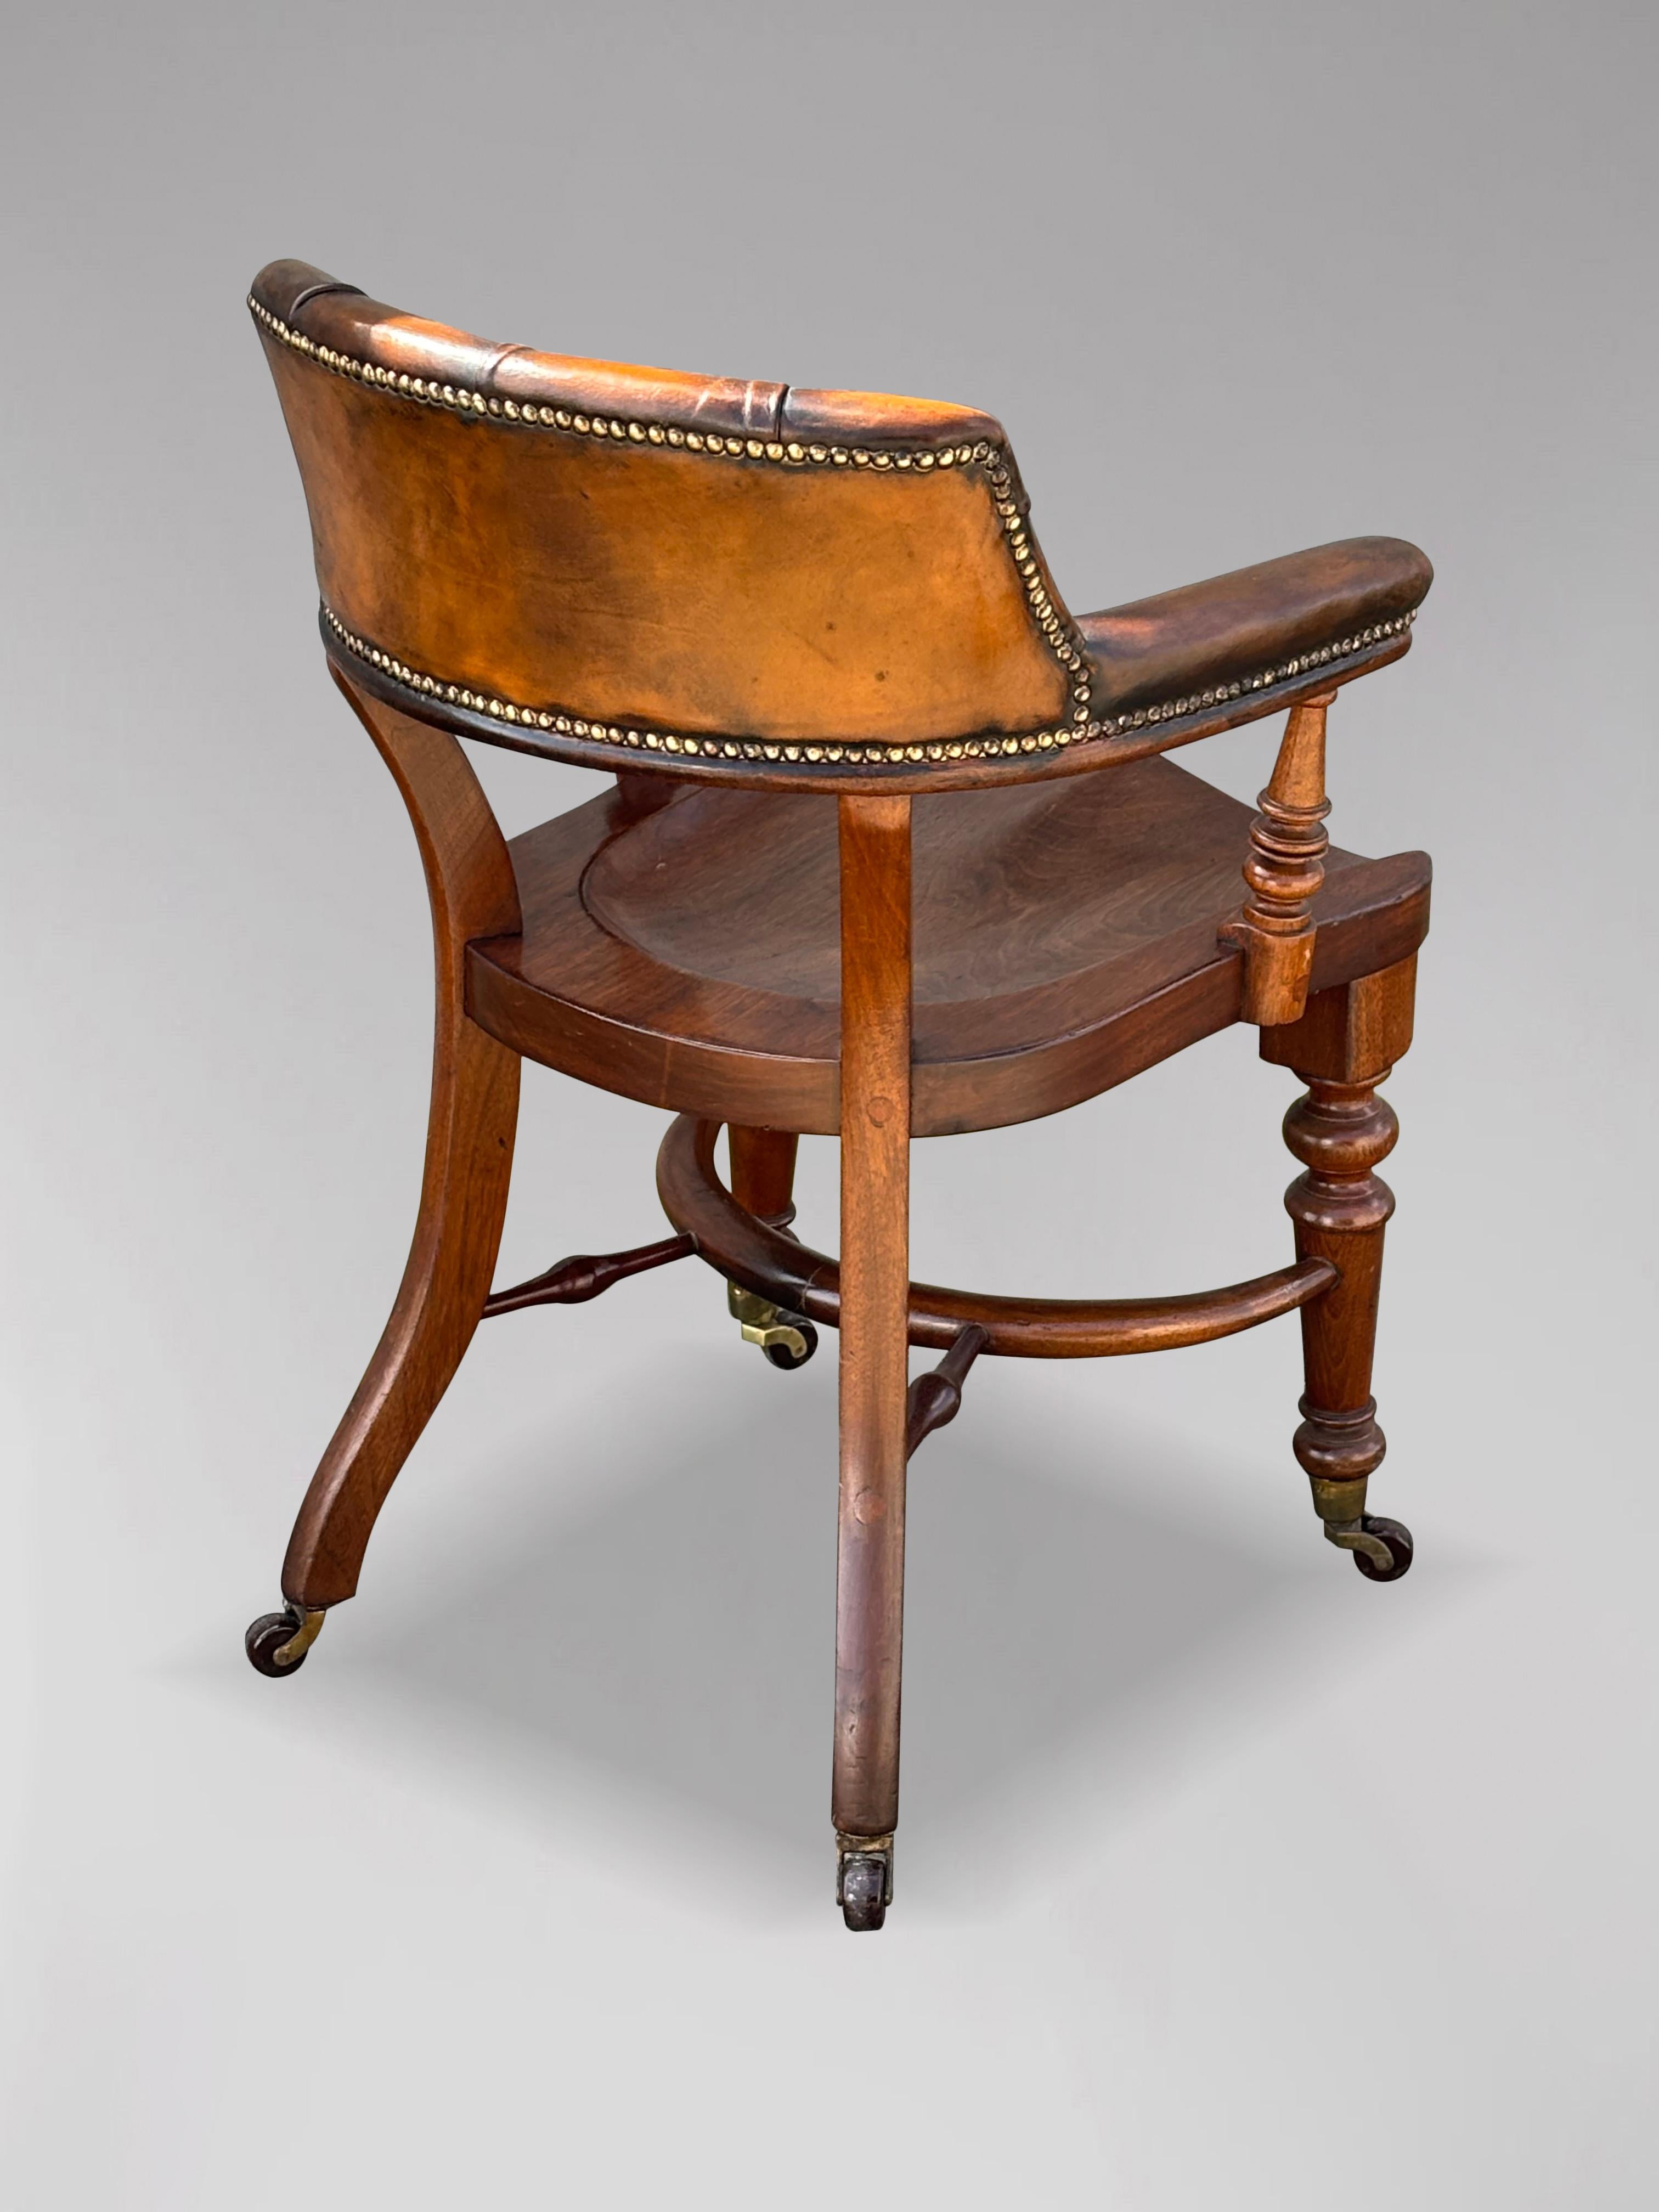 British 19th Century Saddle Seat Leather Desk Armchair For Sale